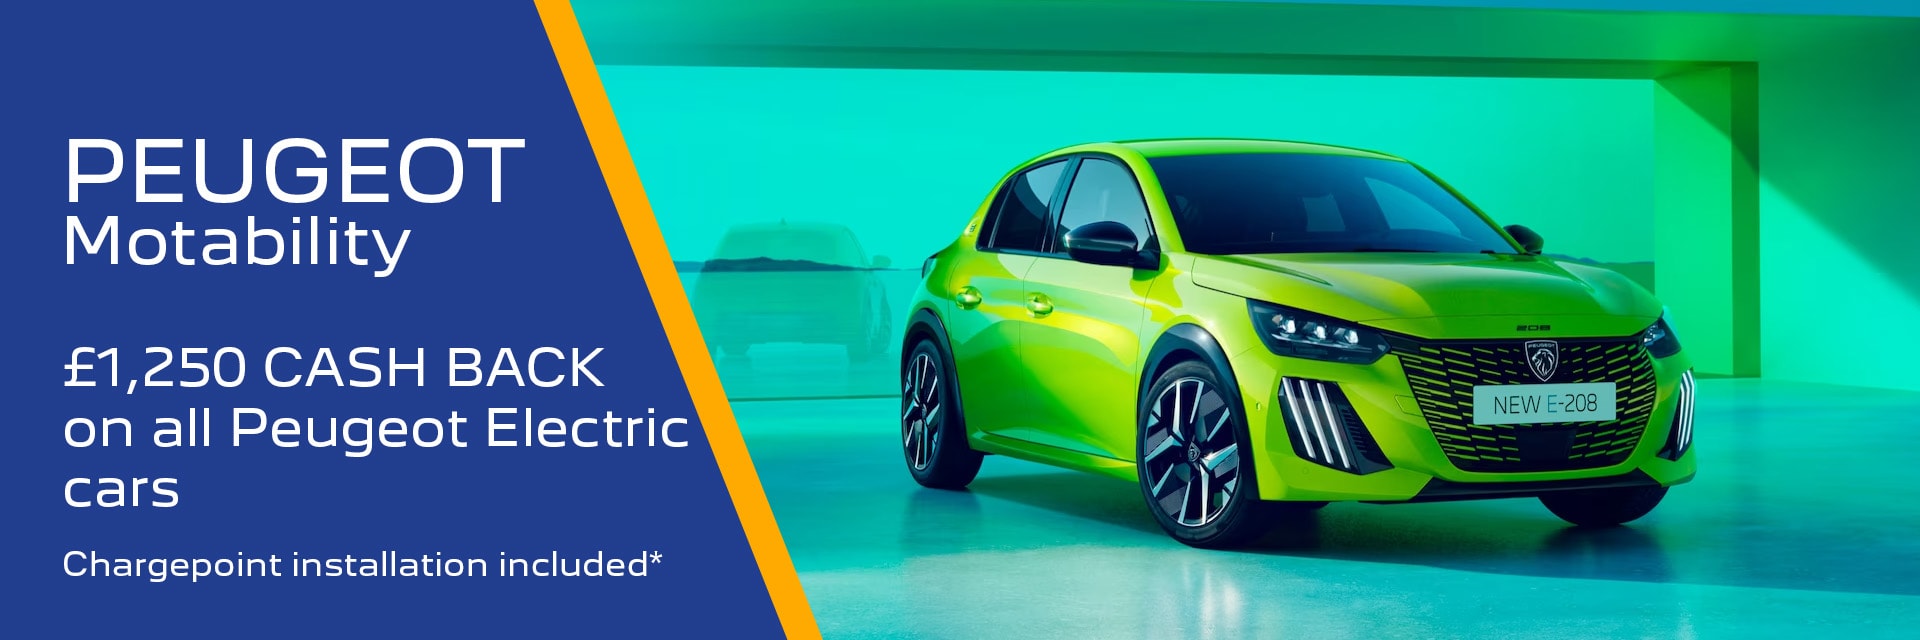 £1,250 CASHBACK ON PEUGEOT ELECTRIC CARS ON THE MOTABILITY SCHEME